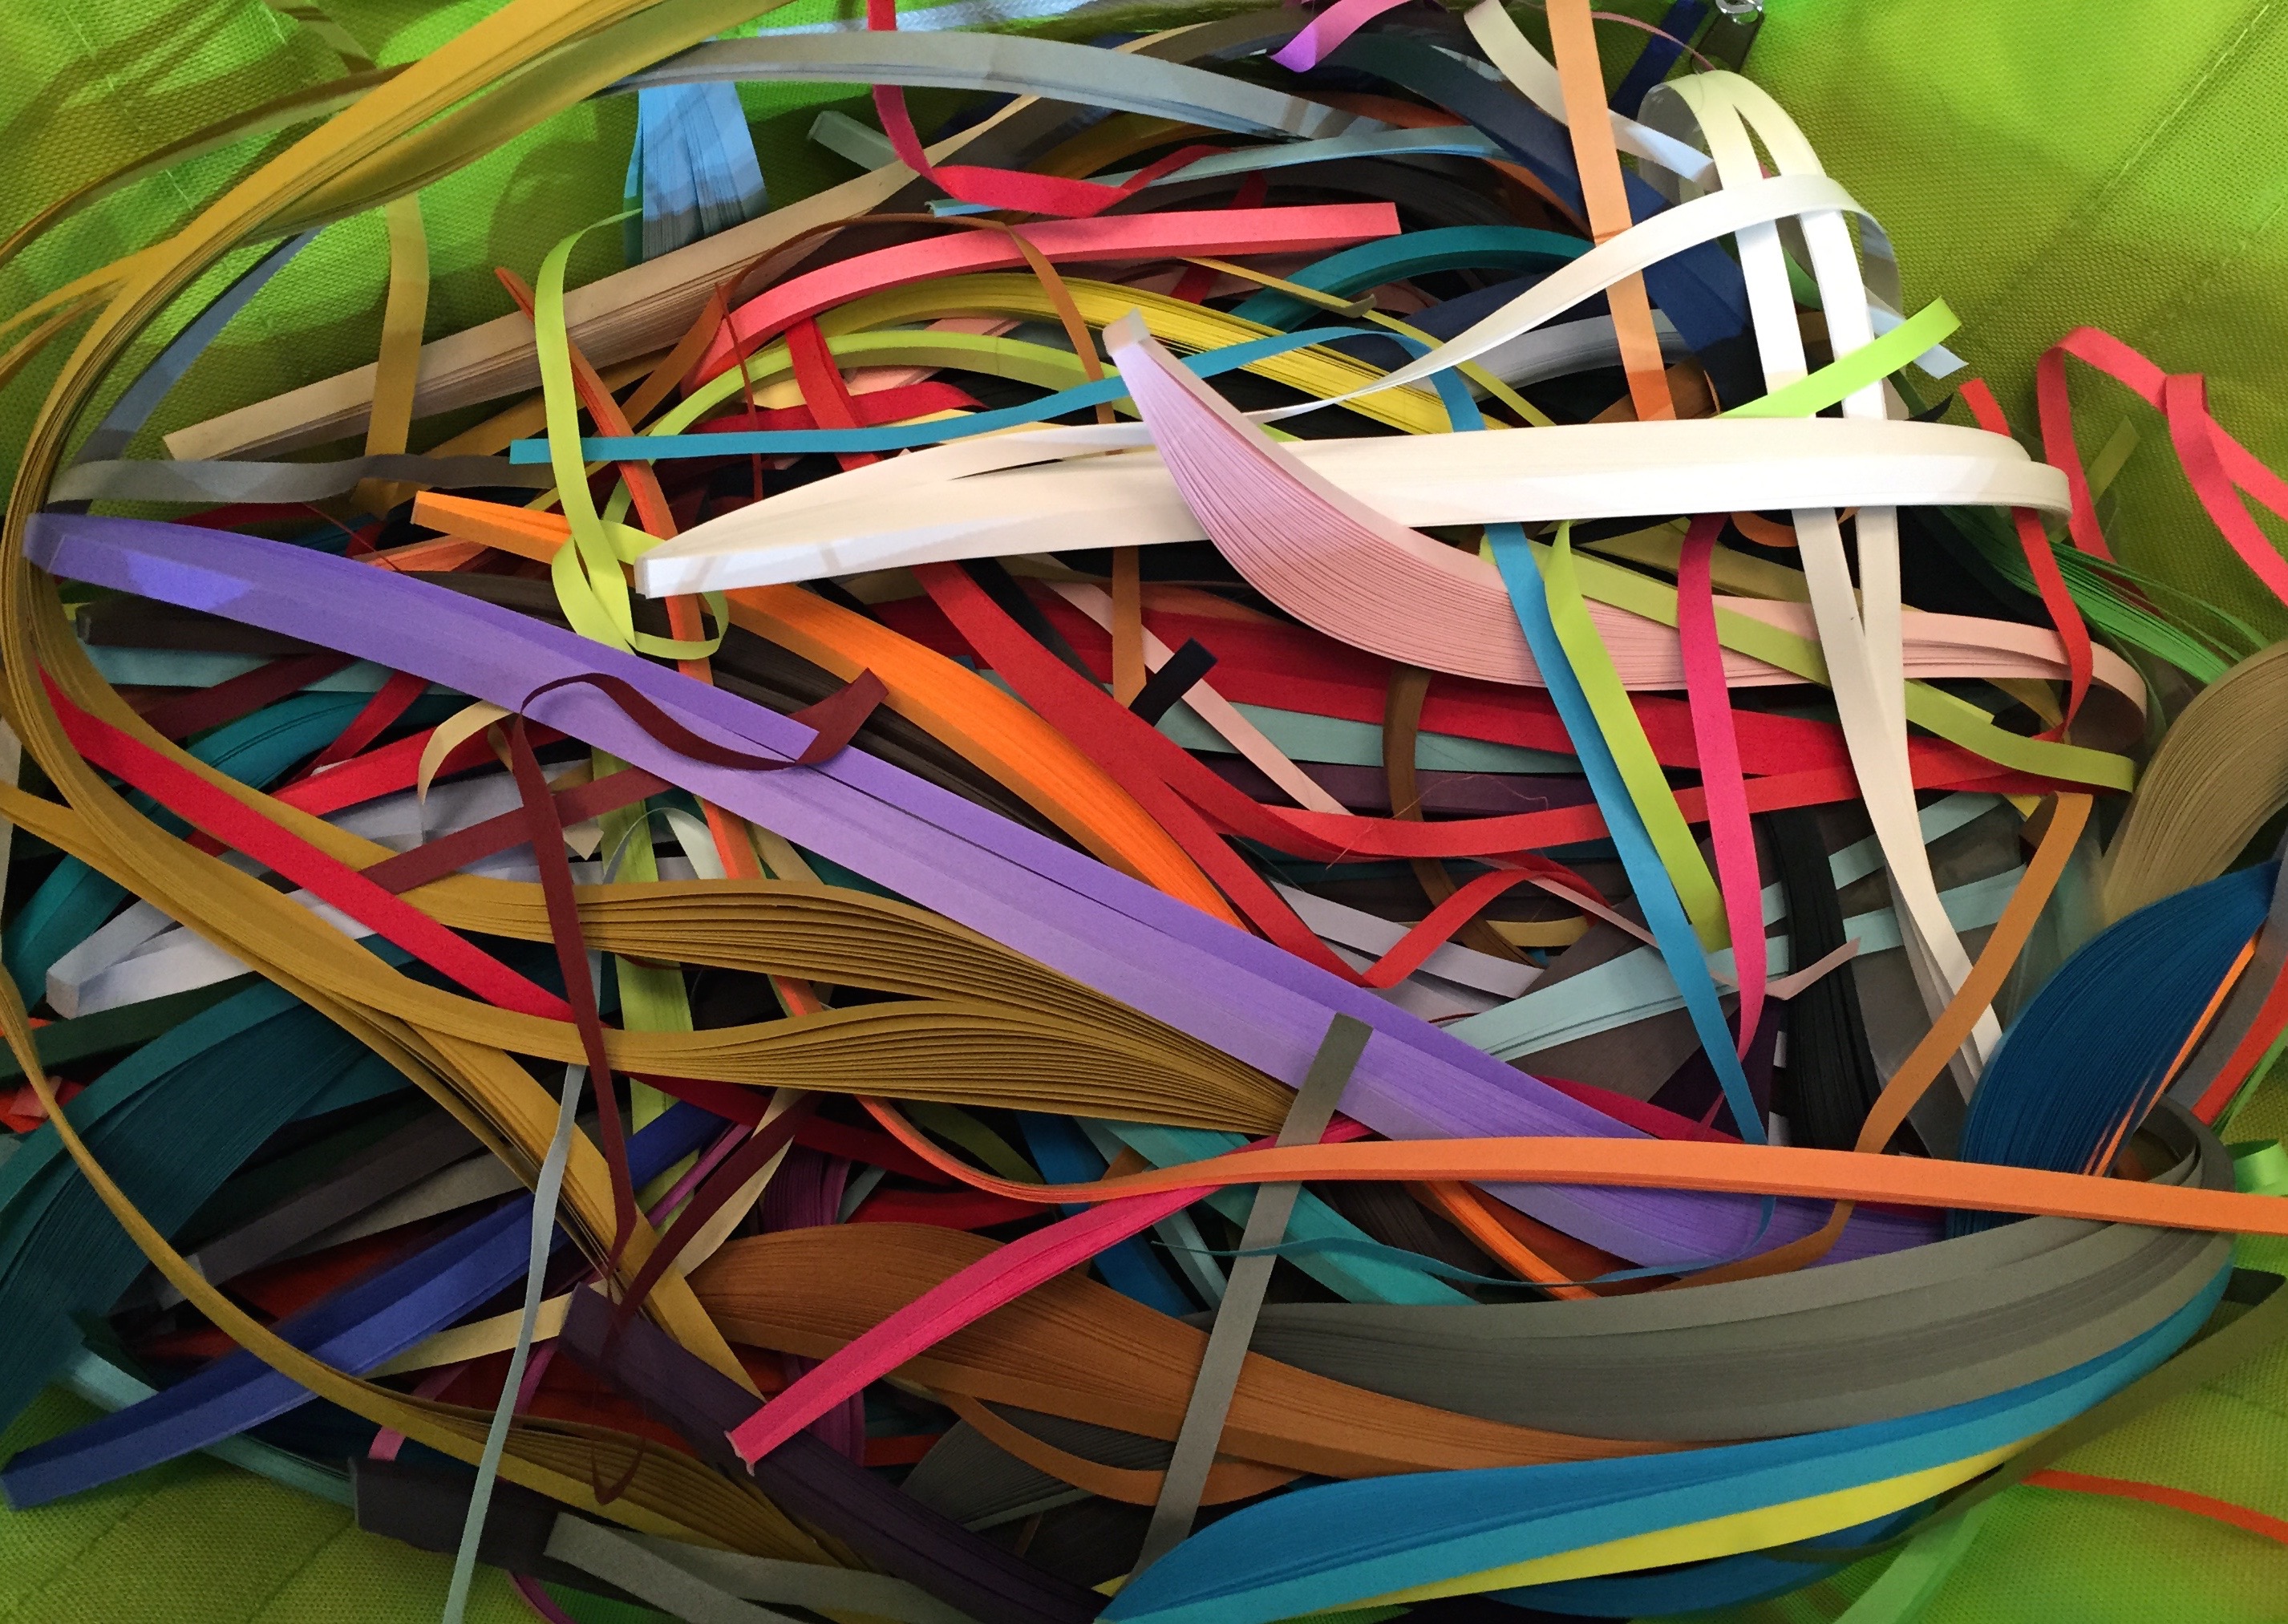 Image of a messy box of quilling paper